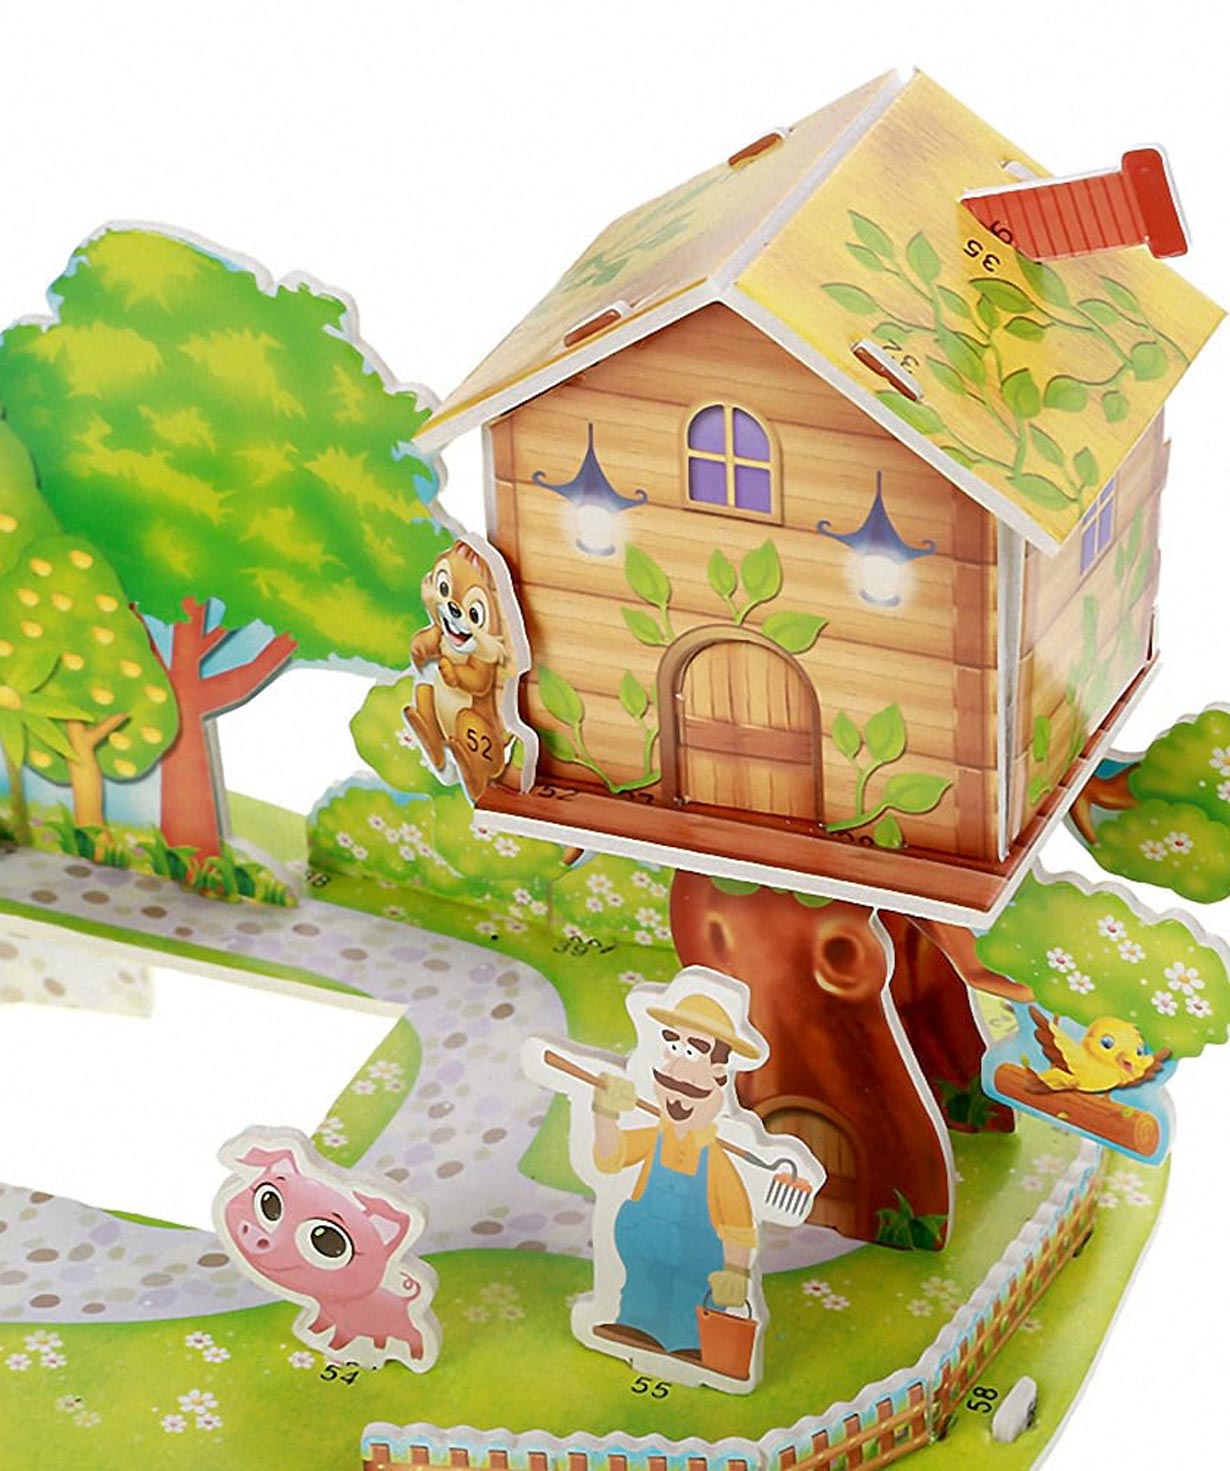 Puzzle ''MINI Zilipoo'' 3D, orchard with natural plants